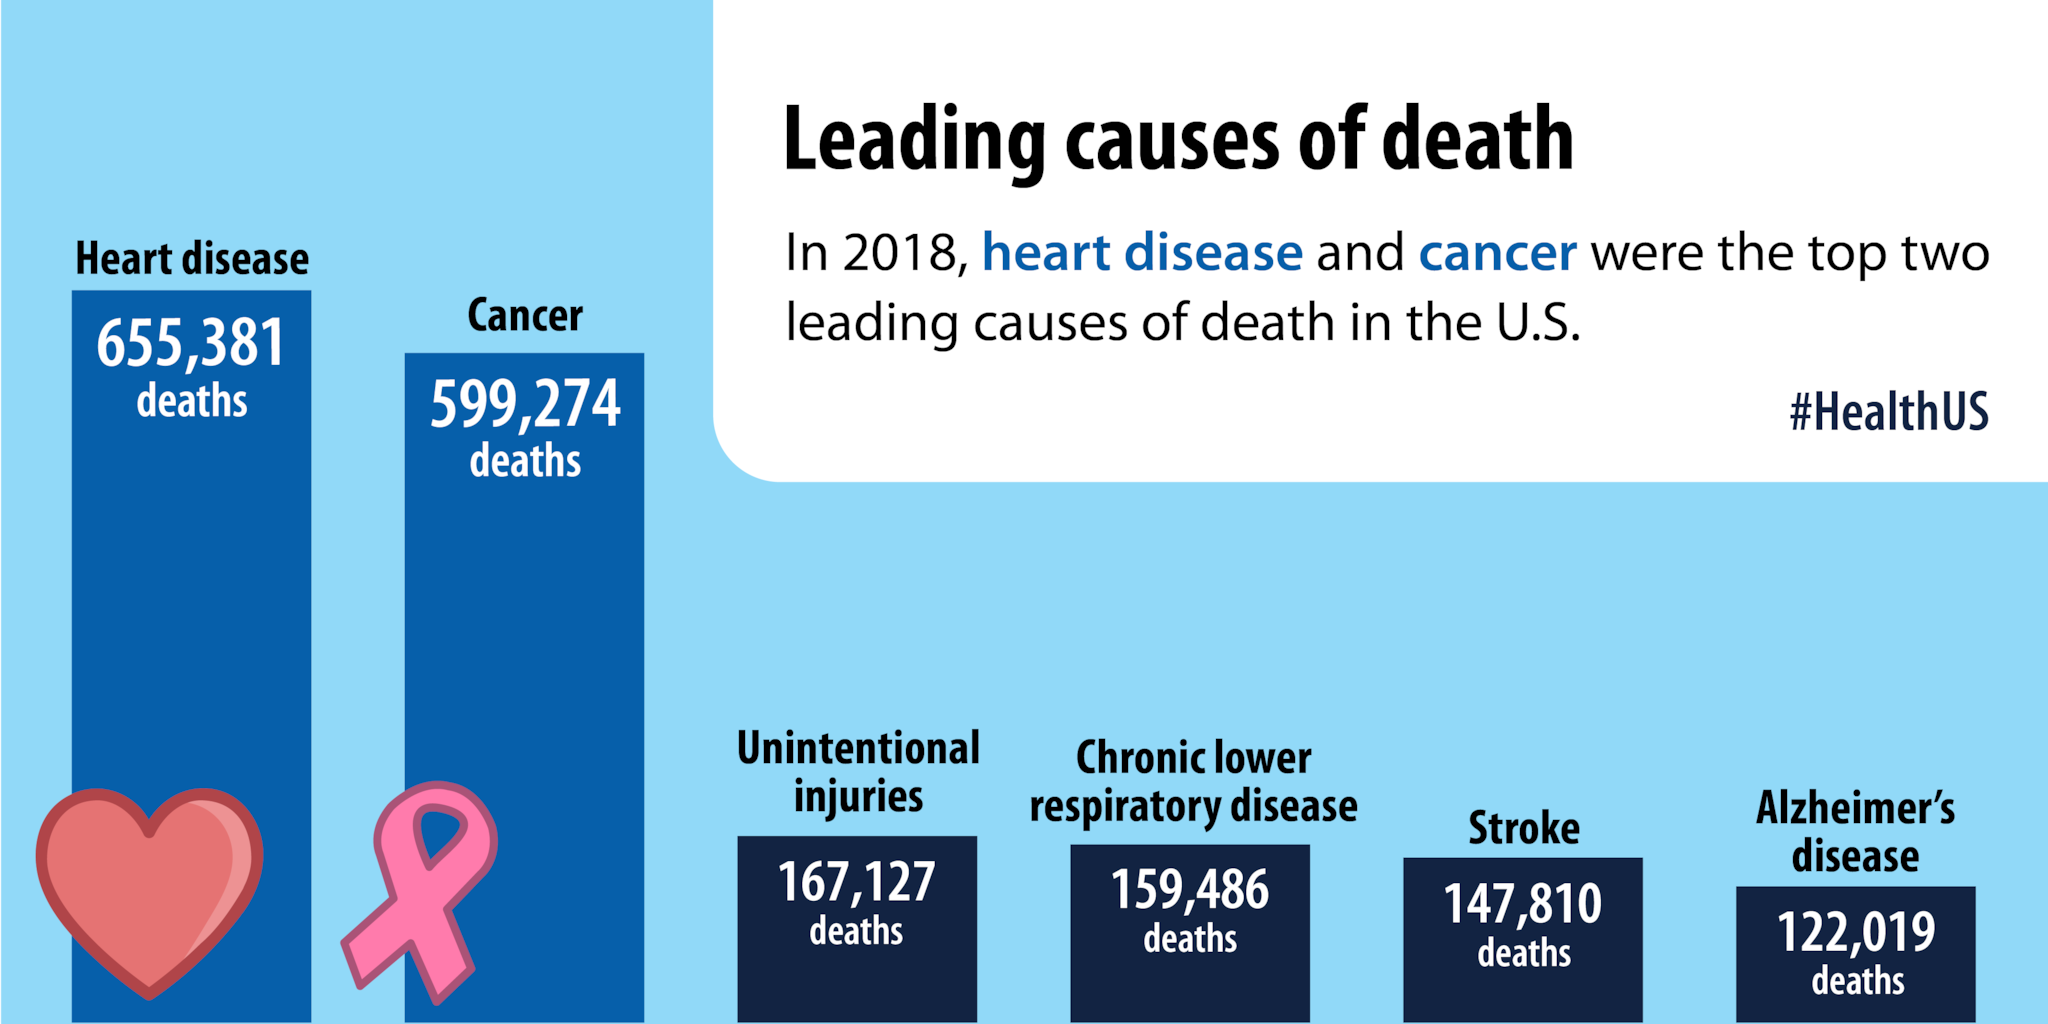 In 2018, heart disease and cancer were the top two leading causes of death in the U.S.